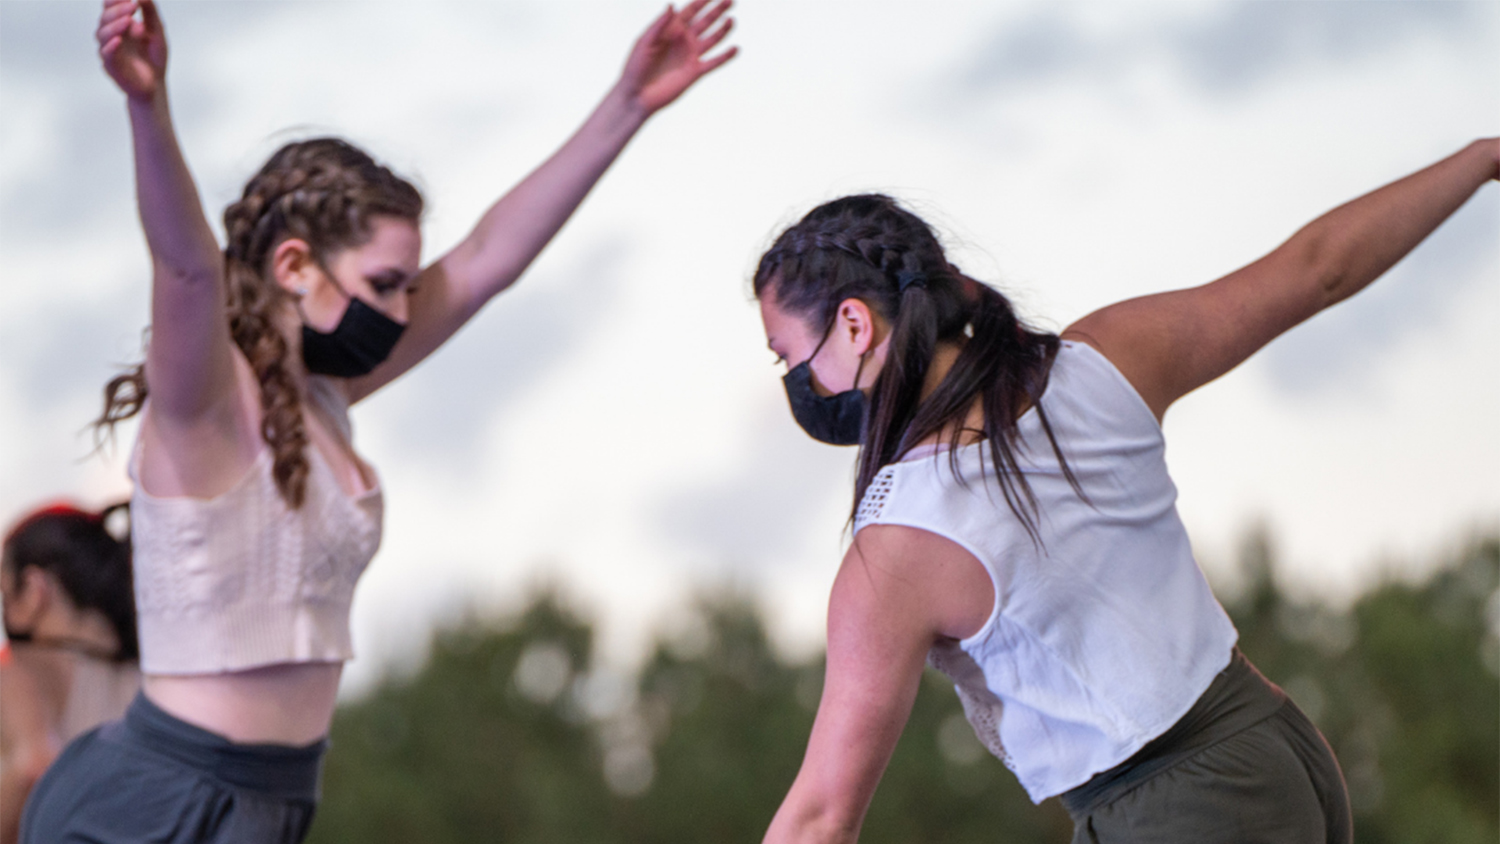 Two masked students perform a dance routine outdoors